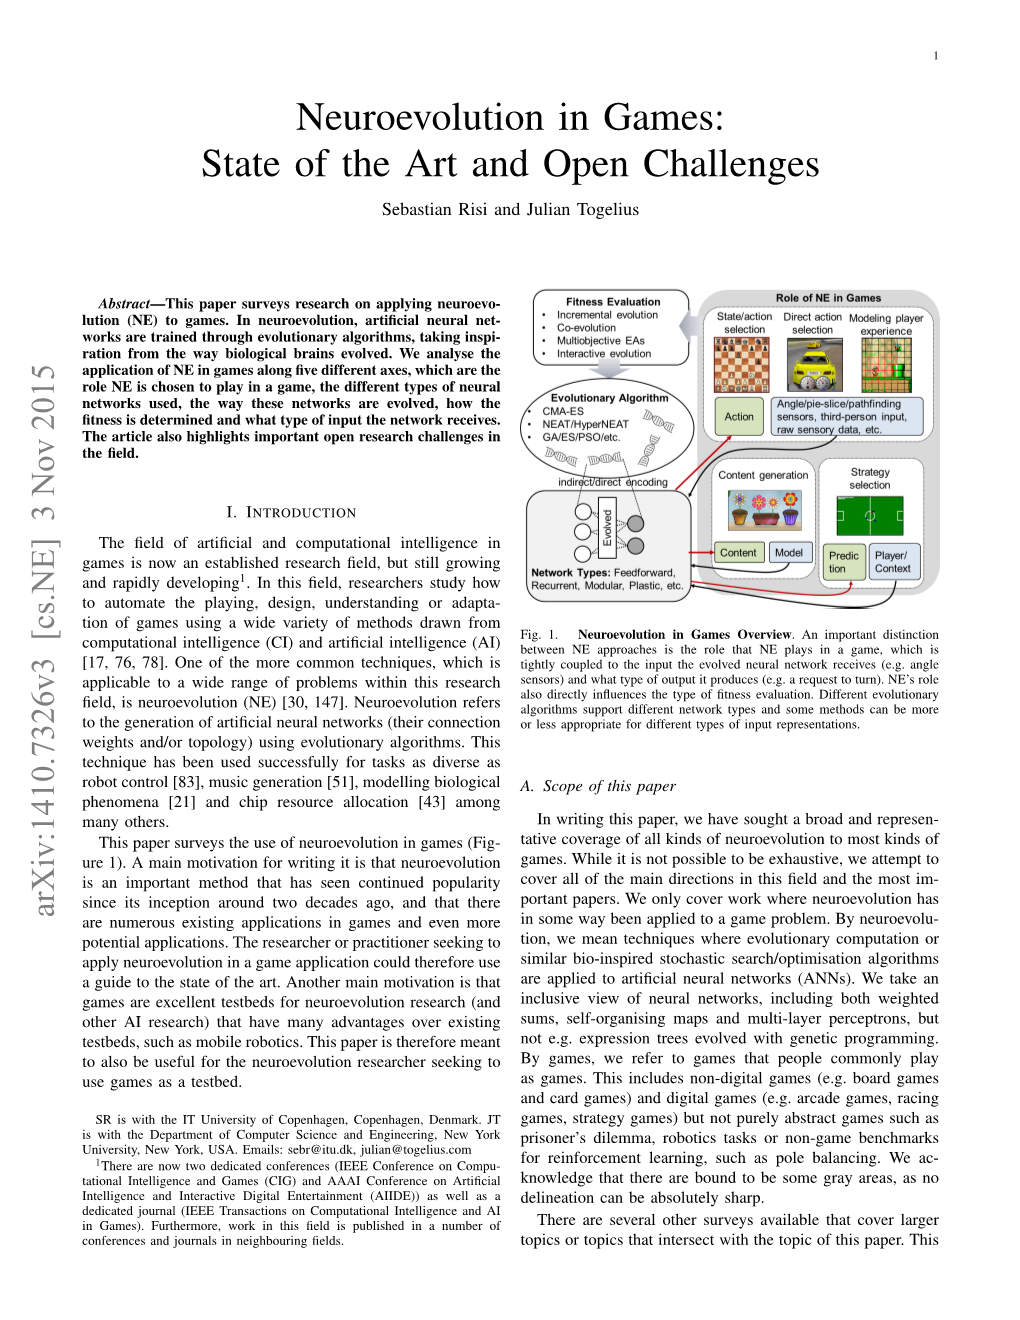 Neuroevolution in Games: State of the Art and Open Challenges Sebastian Risi and Julian Togelius